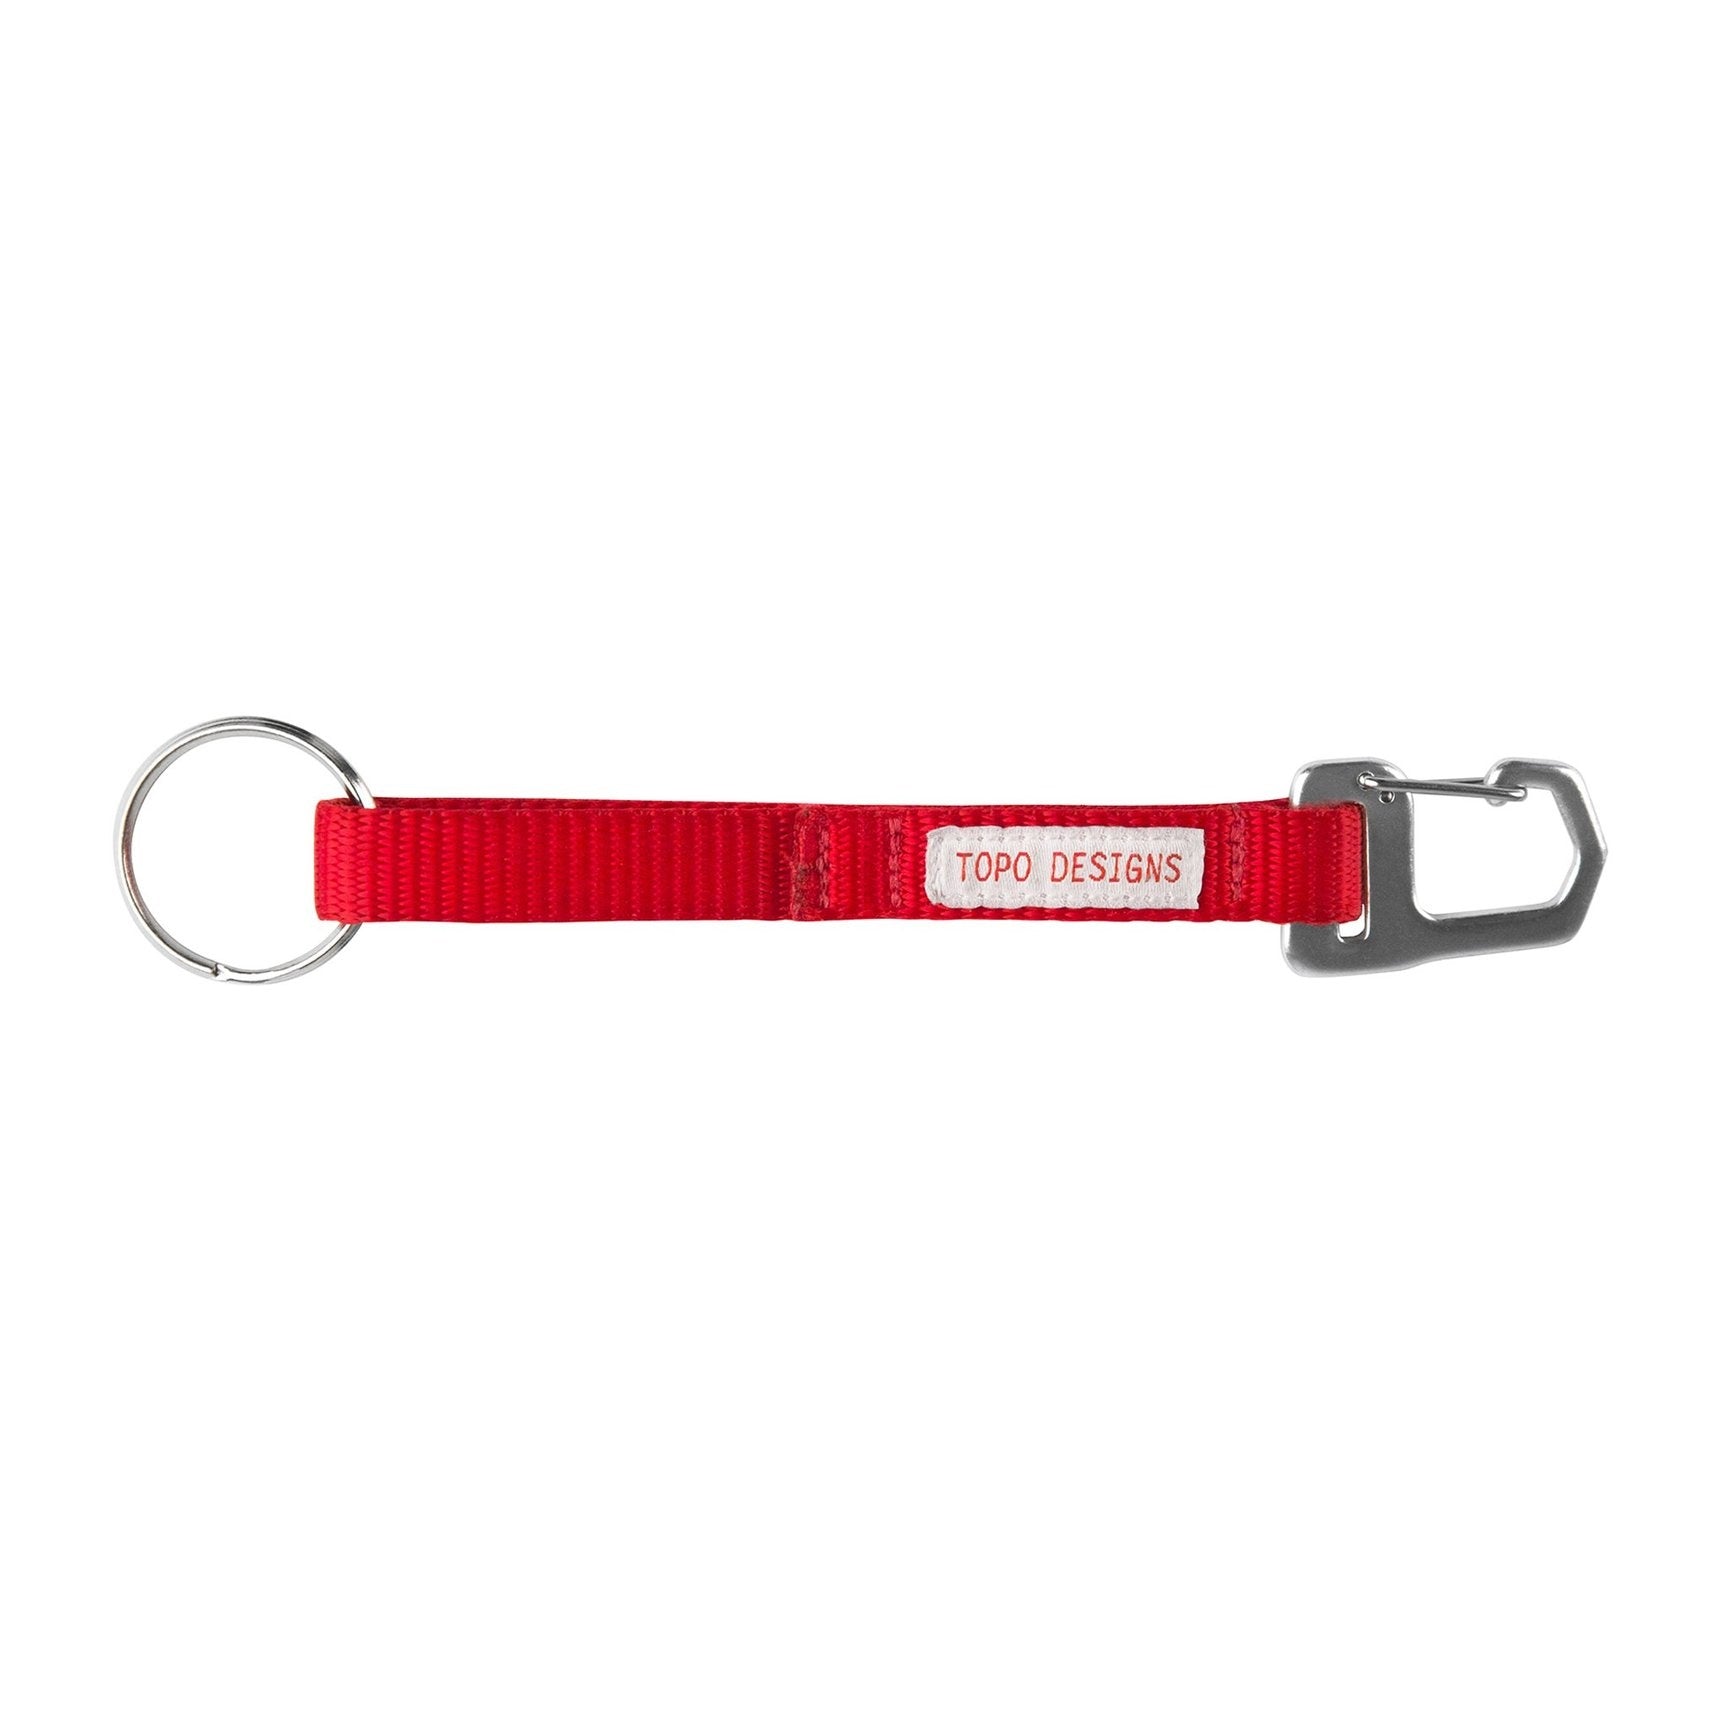 Key Clip - Rouge||Key Clip - Red